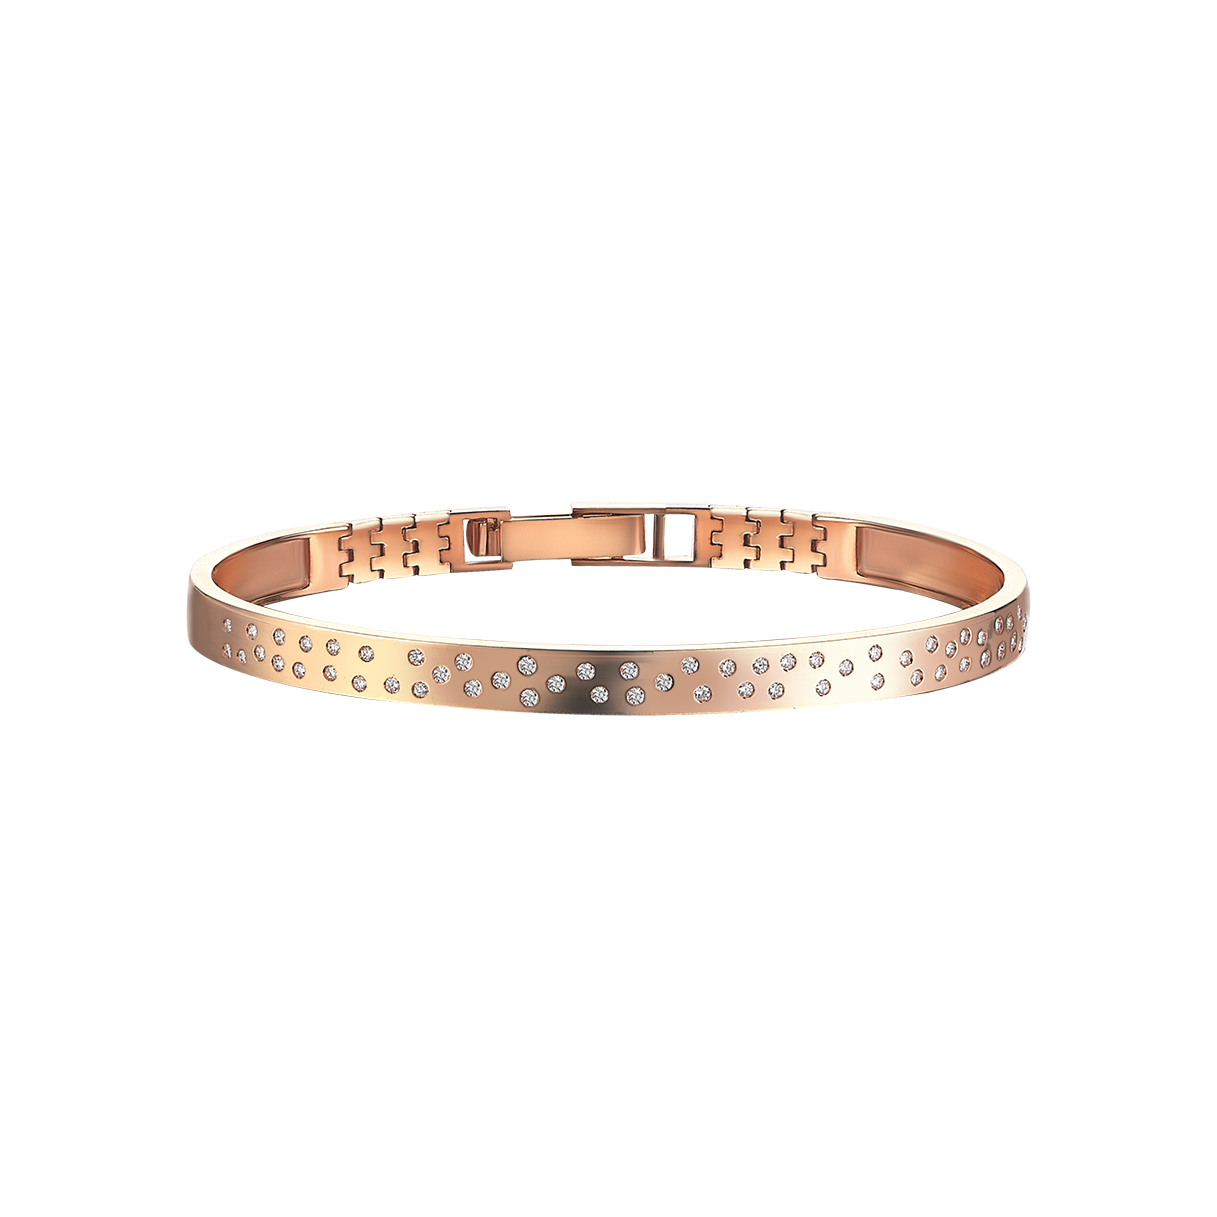 Pave Rigid Fairy Dust Bracelet in Rose Gold - Her Story Shop